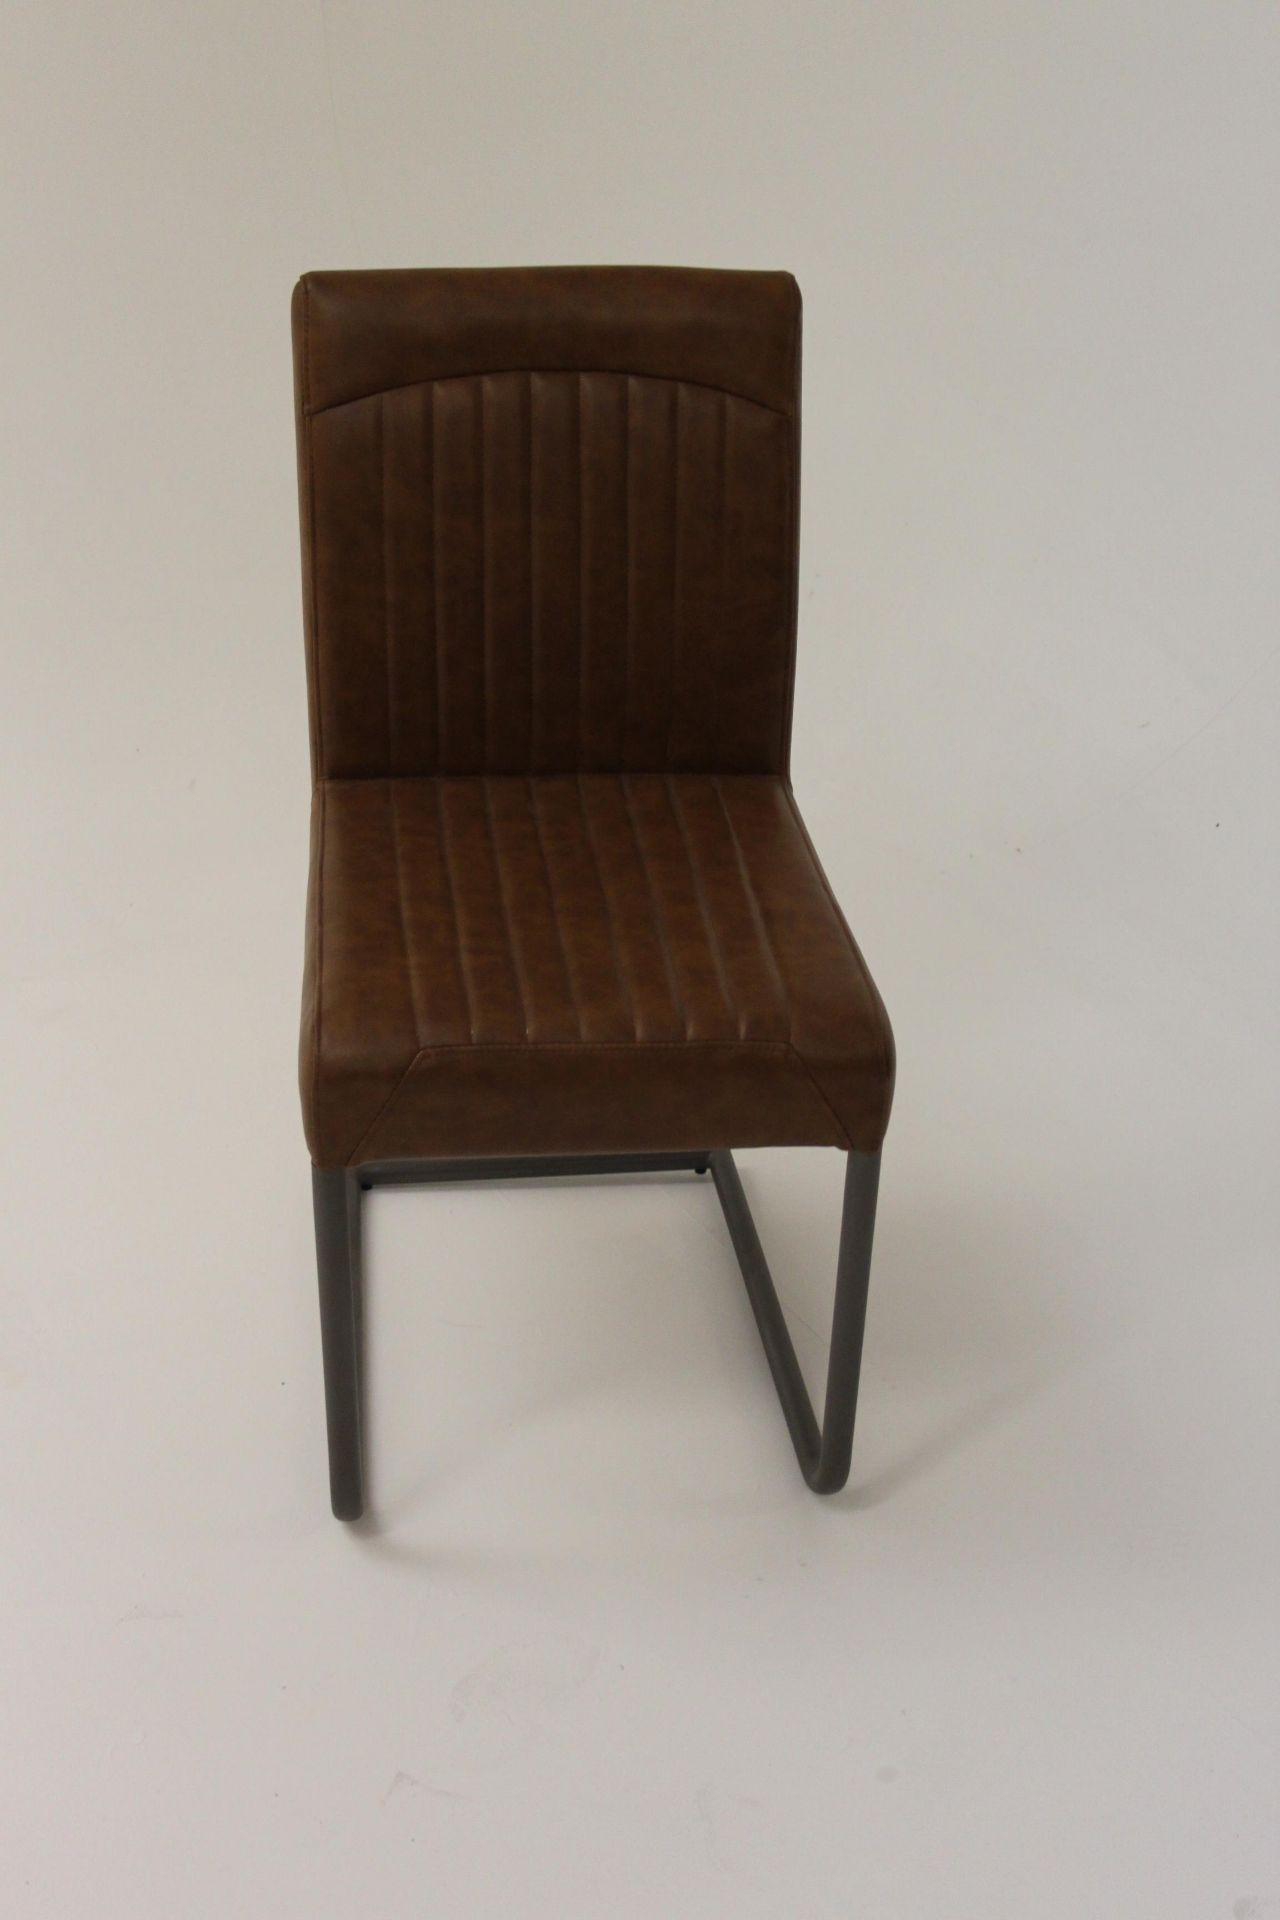 Capri Chair Tan Deep Padding With A Shapely Backrest Makes It Really Comfortable 43 5 X 57 X 91cm (